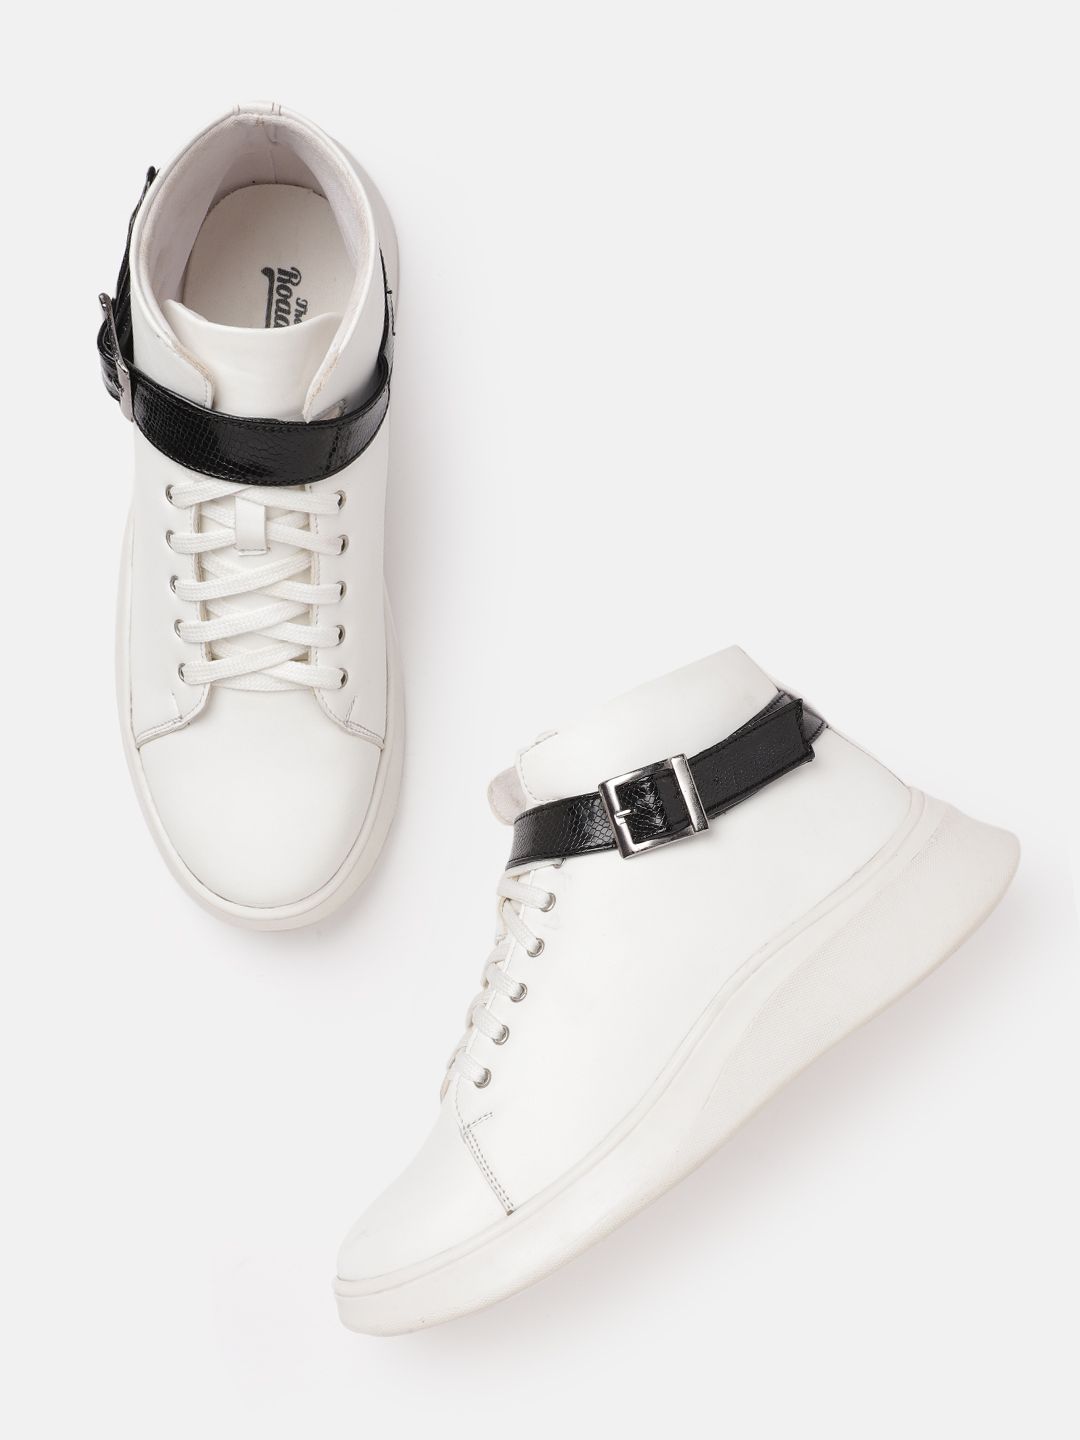 Roadster Women White & Black Solid Flatform Sneakers with Snakeskin Textured Strap Detail Price in India